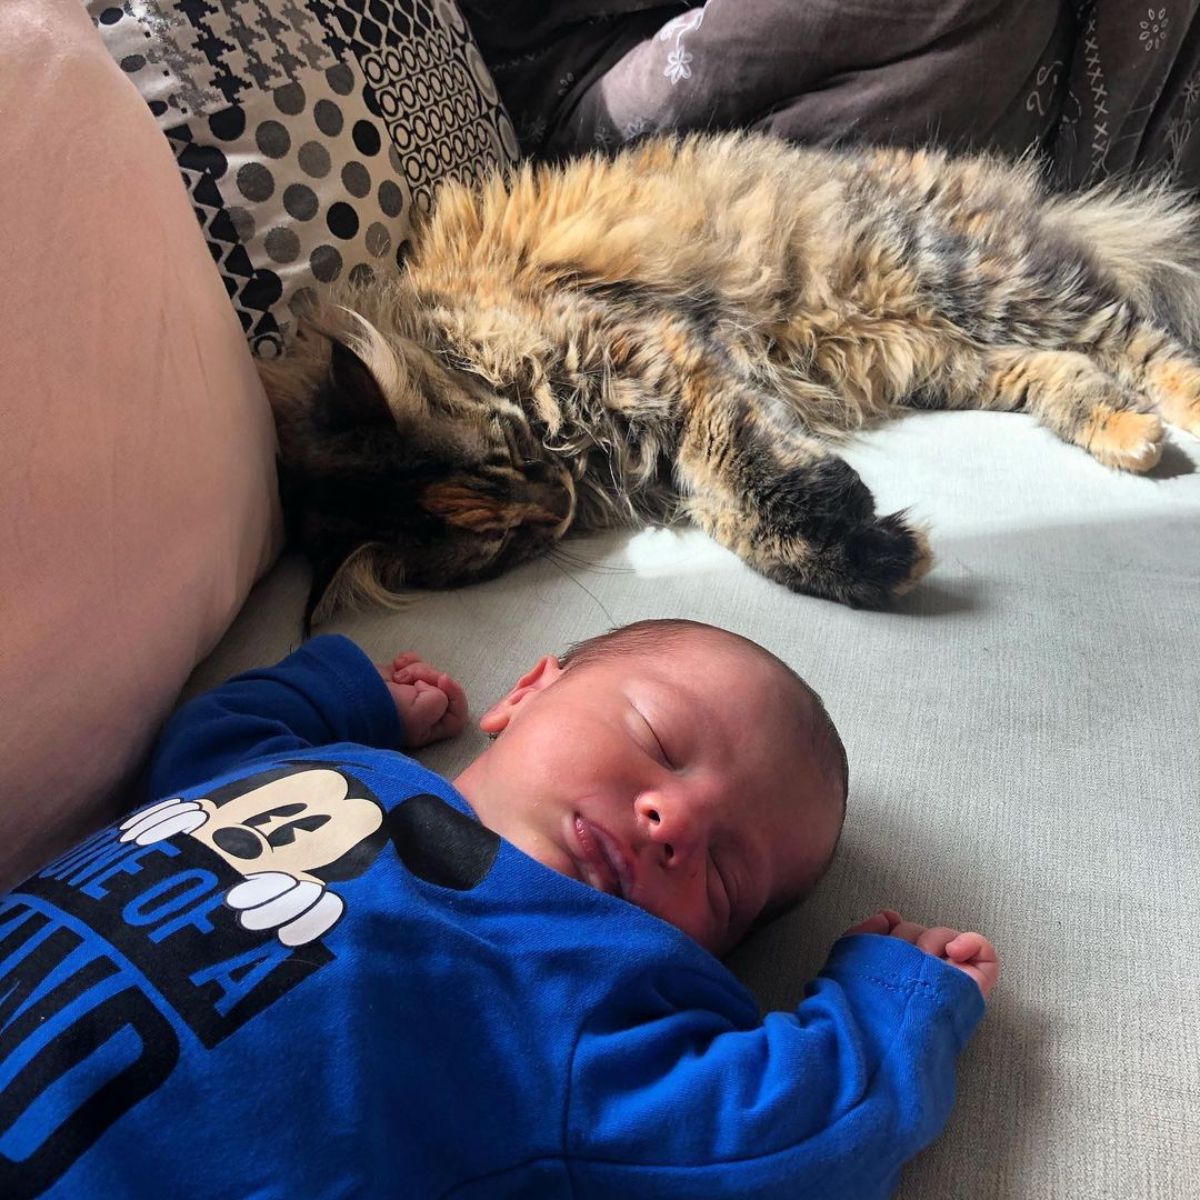 A baby and a tabby maine coon sleeping next to each other on a couch.